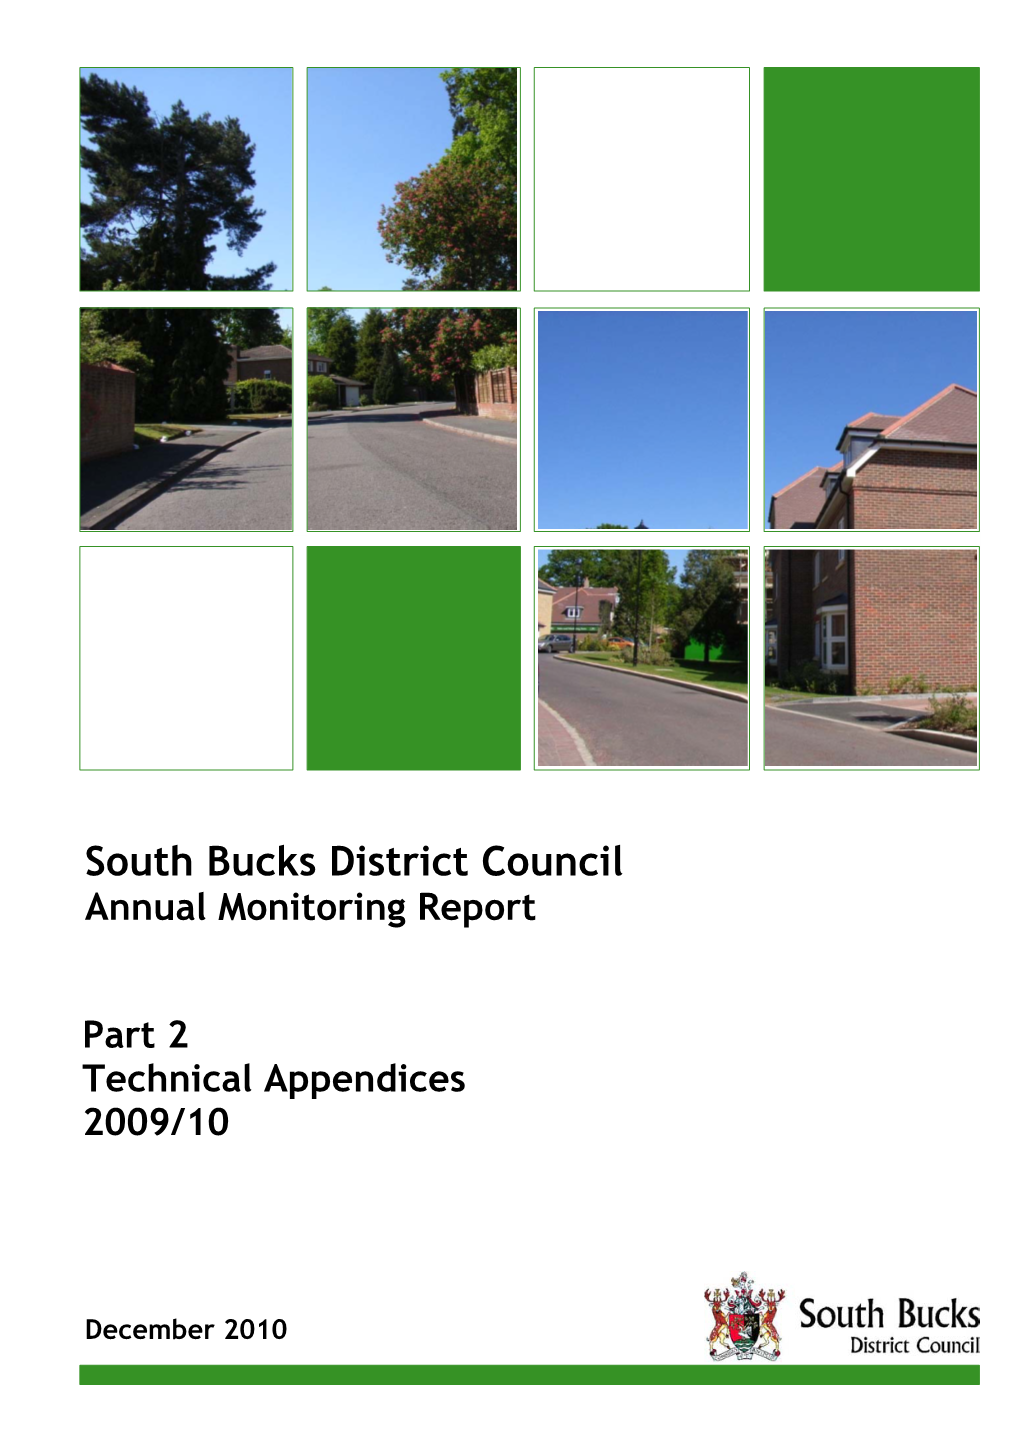 South Bucks District Council Annual Monitoring Report